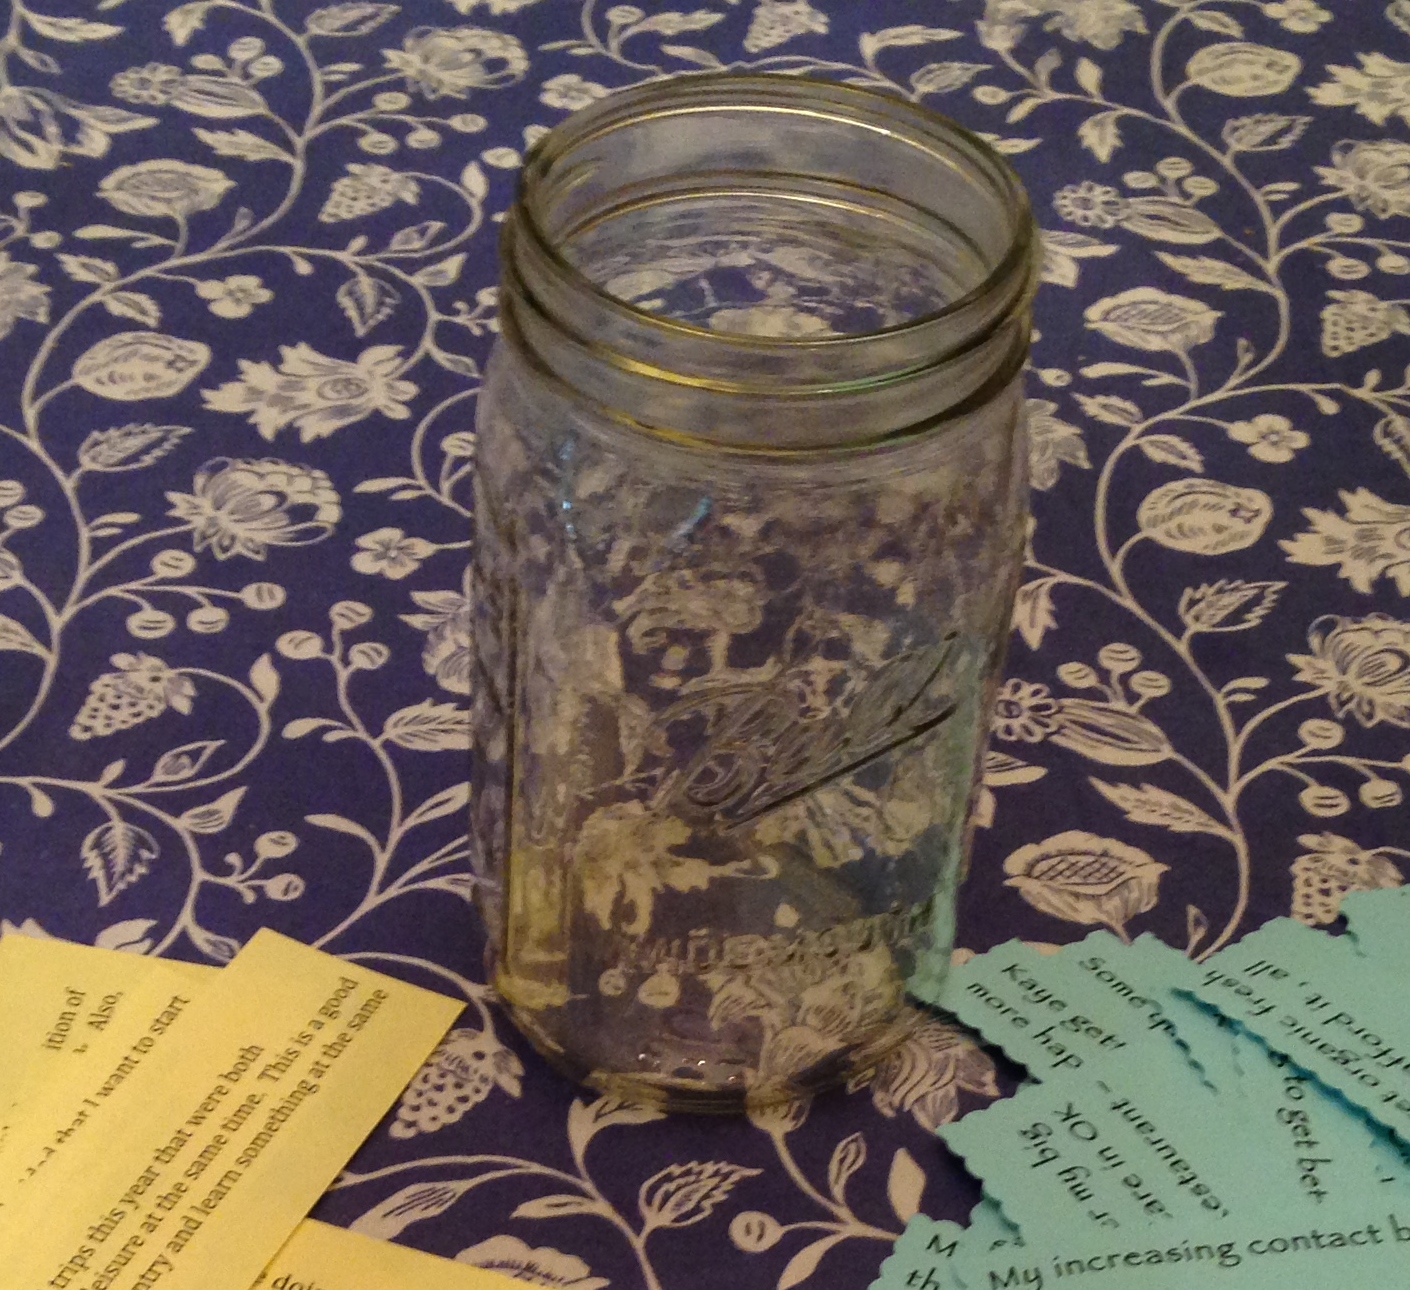 blessing jar 2014 prep with strips of paper